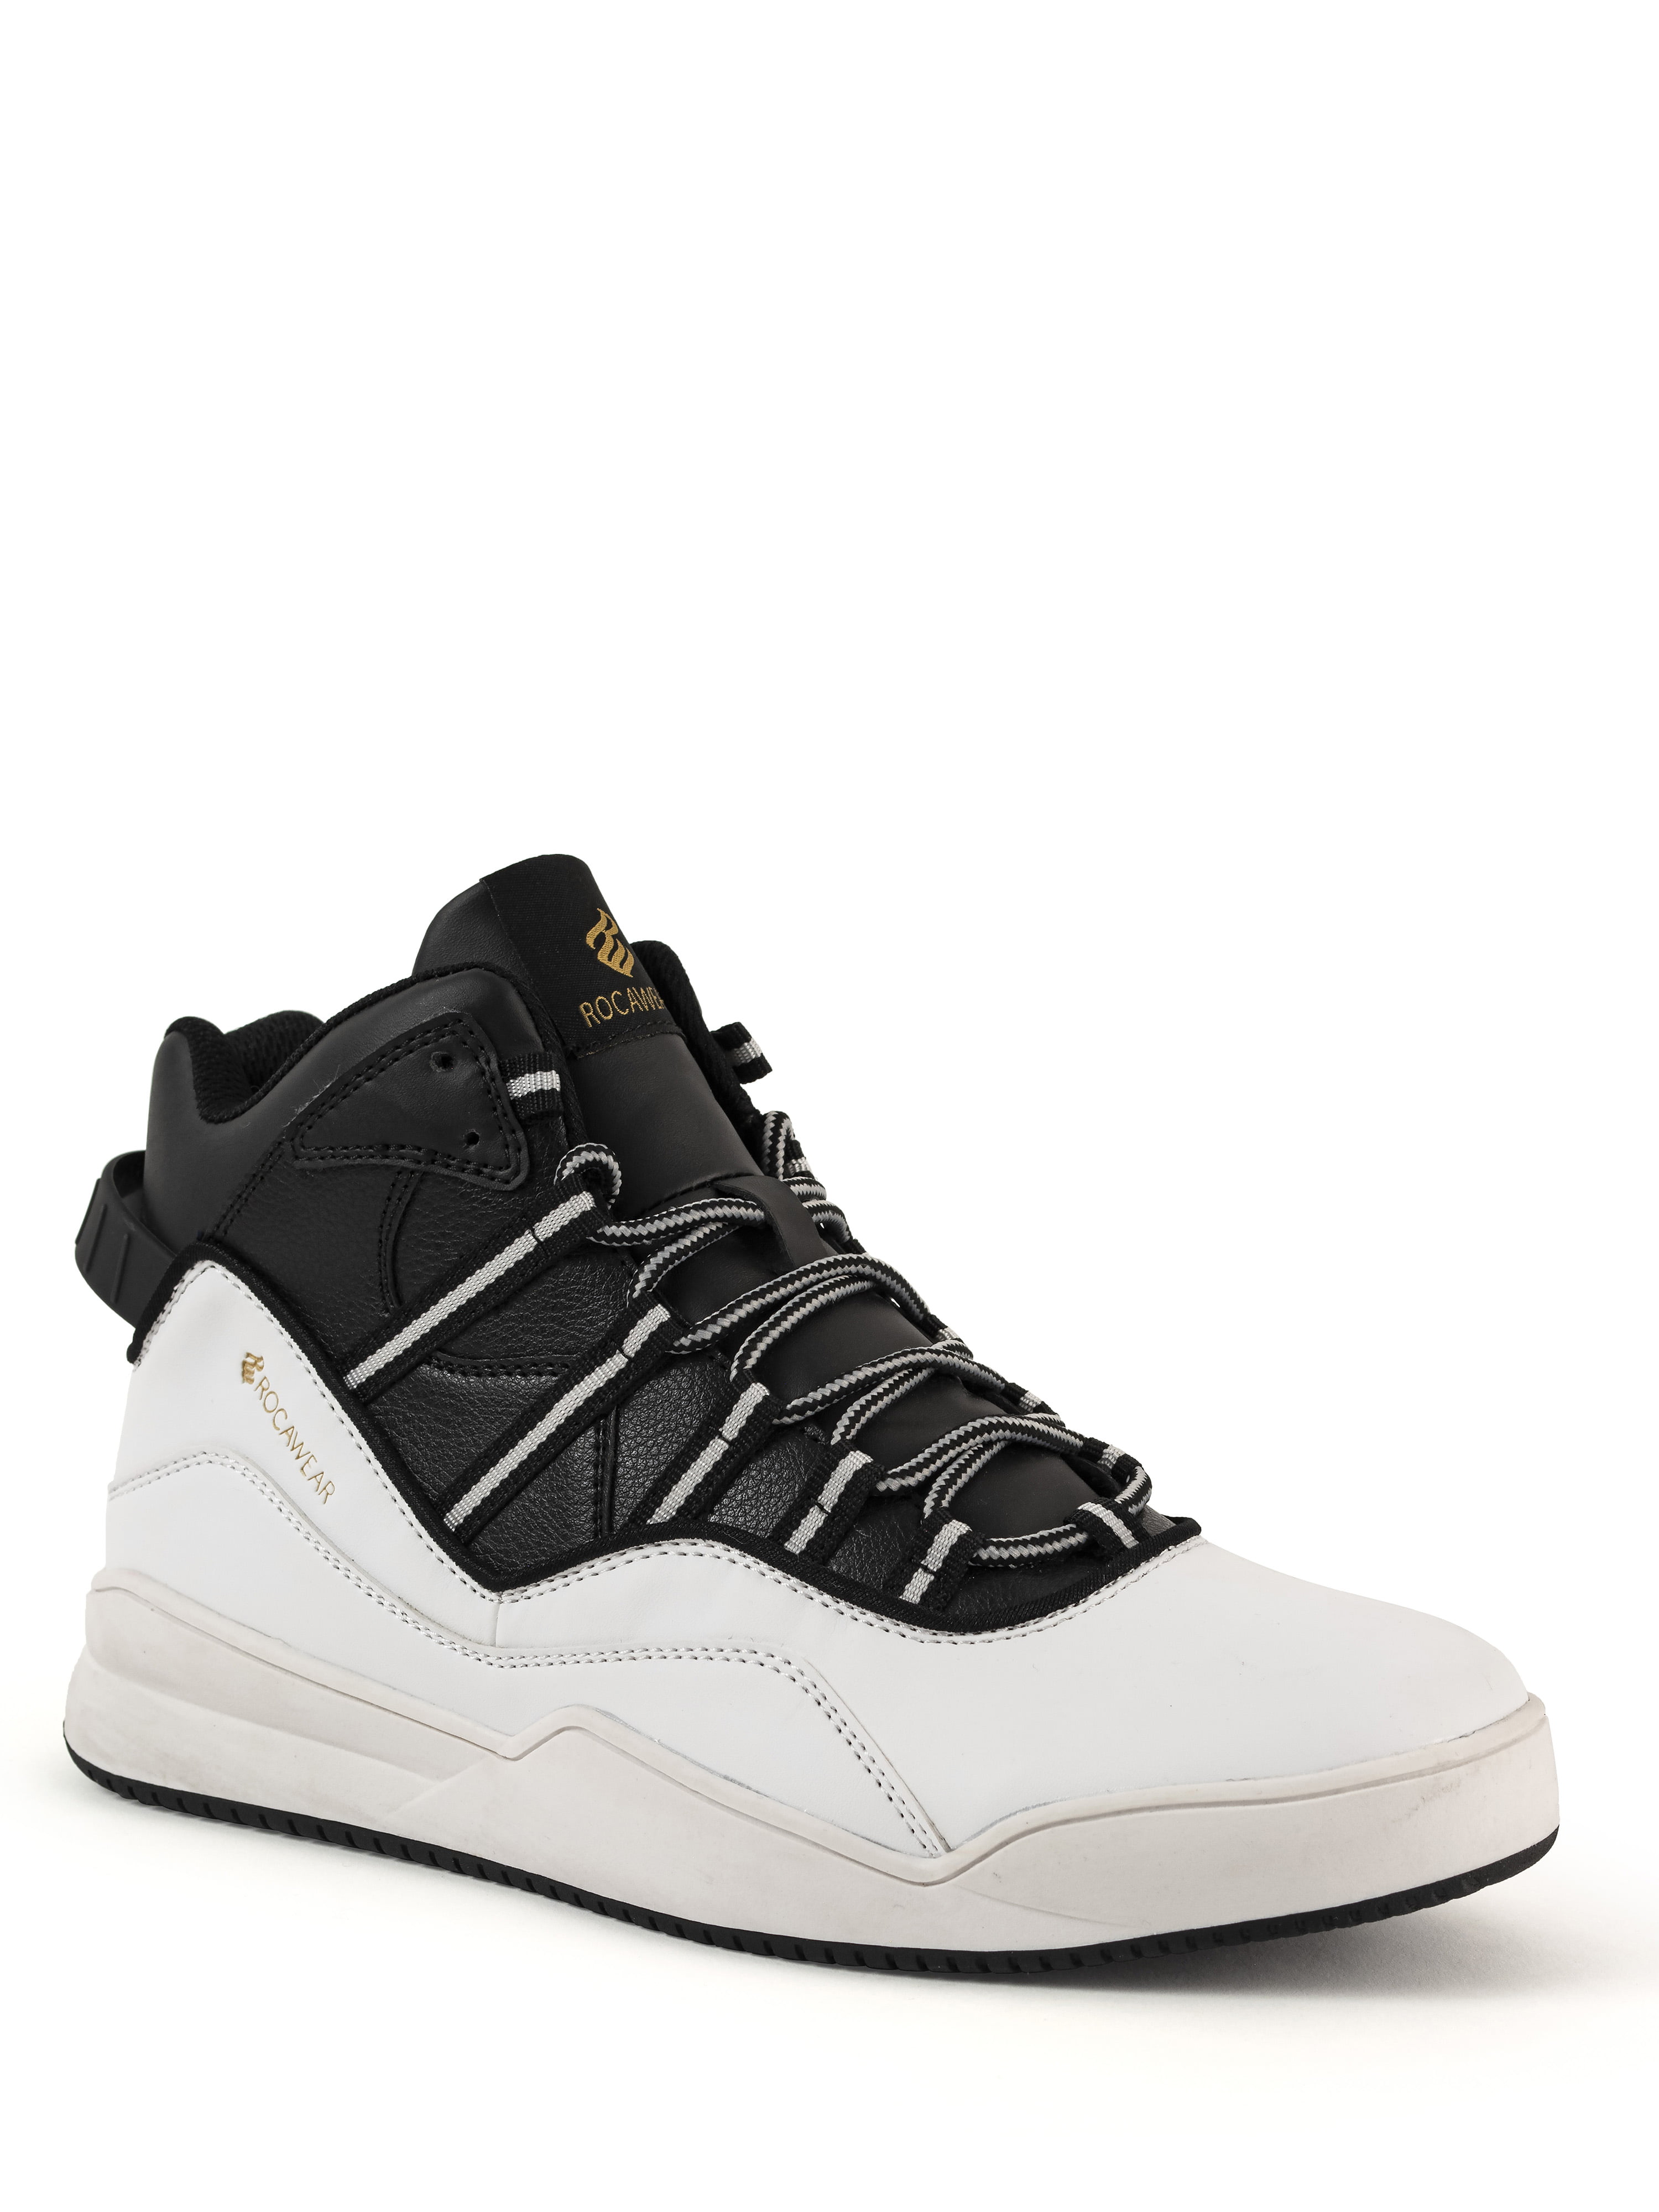 rocawear tennis shoes